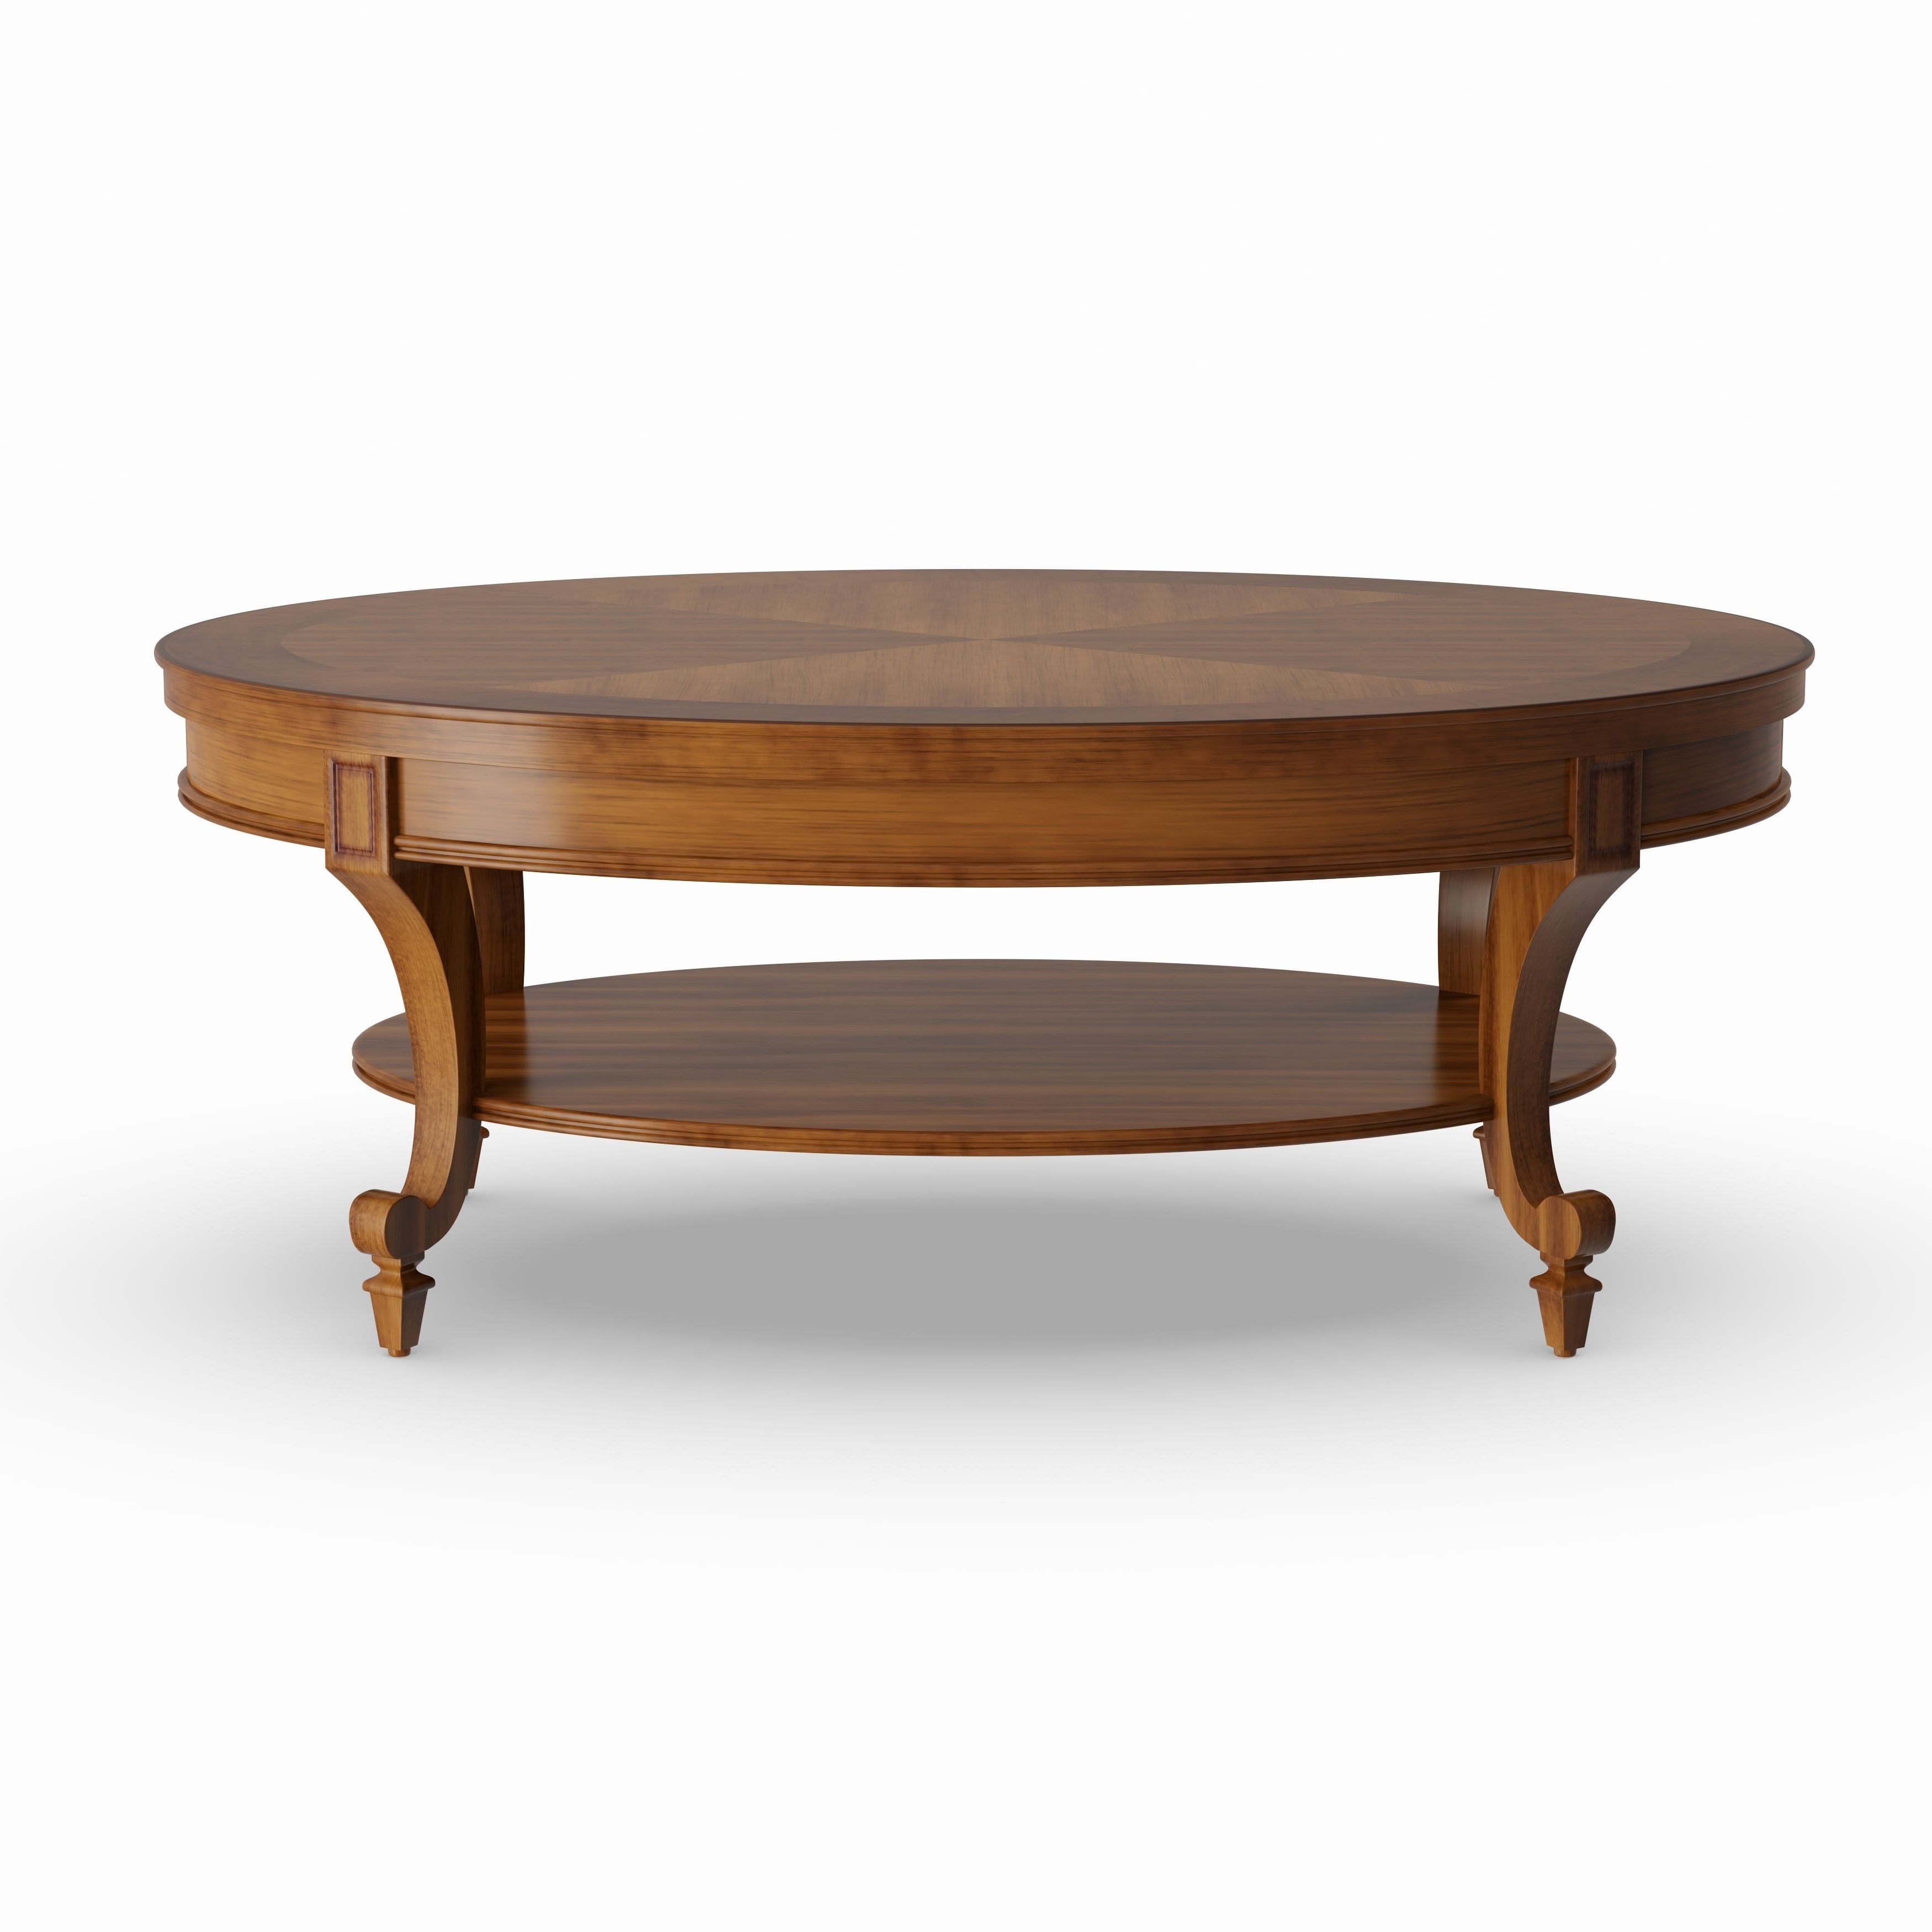 Gracewood Hollow Dones Traditional Cinnamon Round End Table Within Well Known Gracewood Hollow Dones Traditional Cinnamon Round End Tables (View 4 of 20)